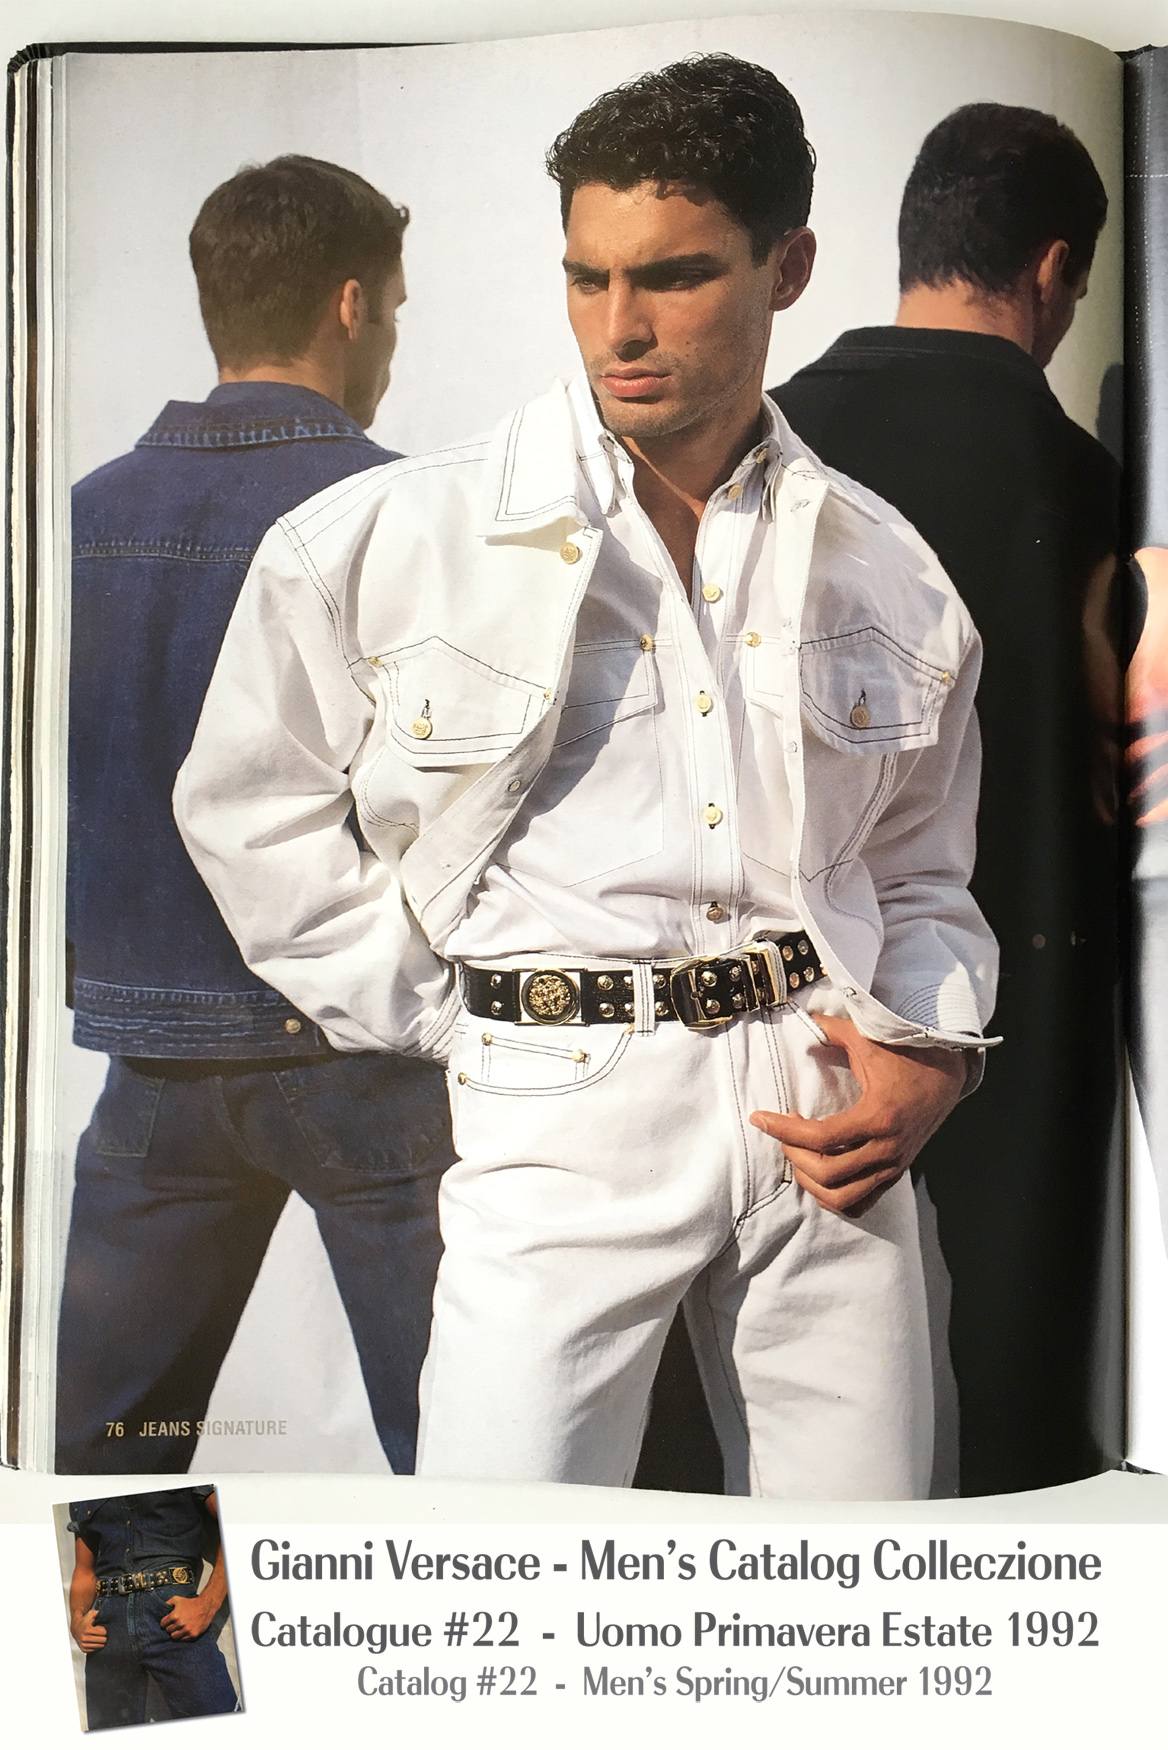 A Page Selection from Denim Jackets White Jeans Gianni Versace Men’s Uomo Catalog Catalogue #22 – Spring/Summer Primavera Estate 1992